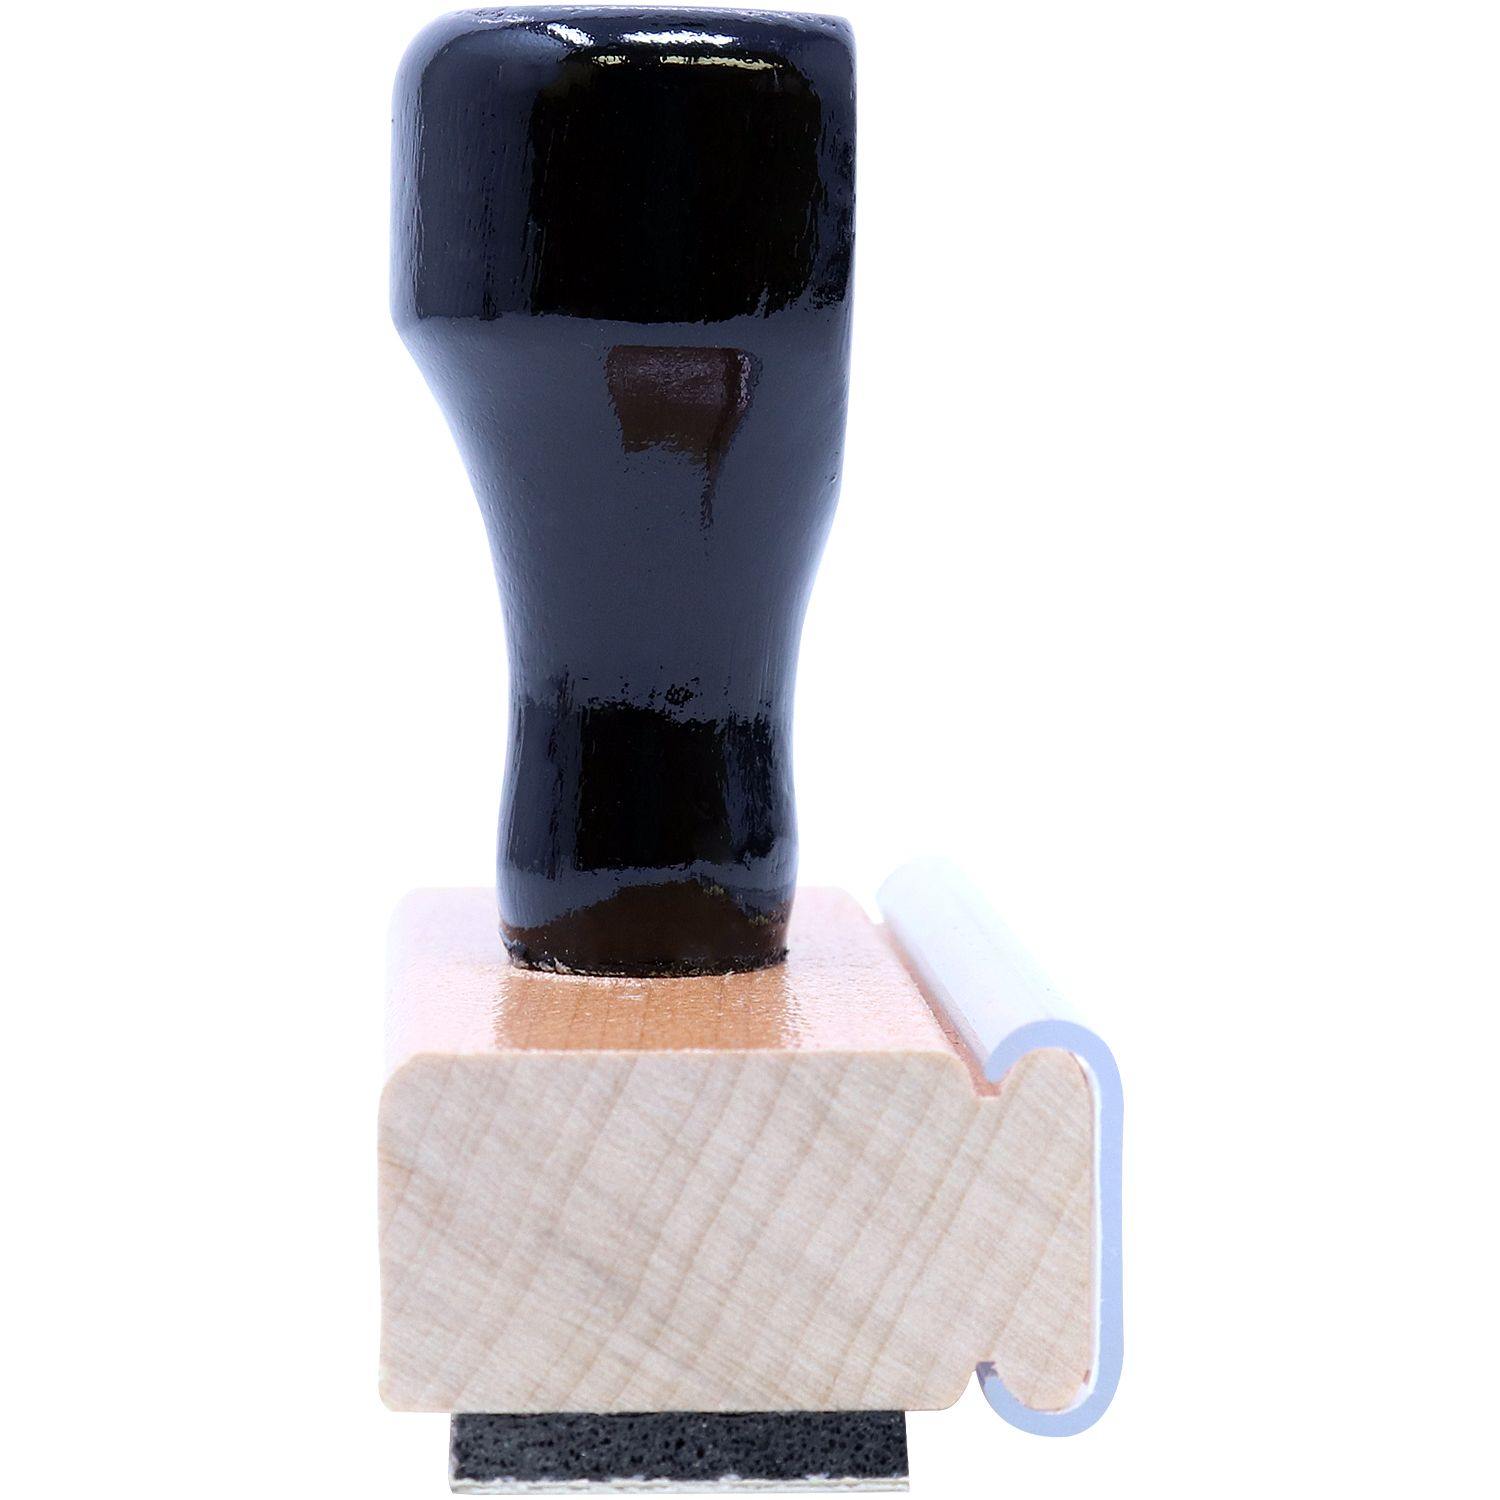 Large Vacant Rubber Stamp - Engineer Seal Stamps - Brand_Acorn, Impression Size_Large, Stamp Type_Regular Stamp, Type of Use_Office, Type of Use_Postal & Mailing